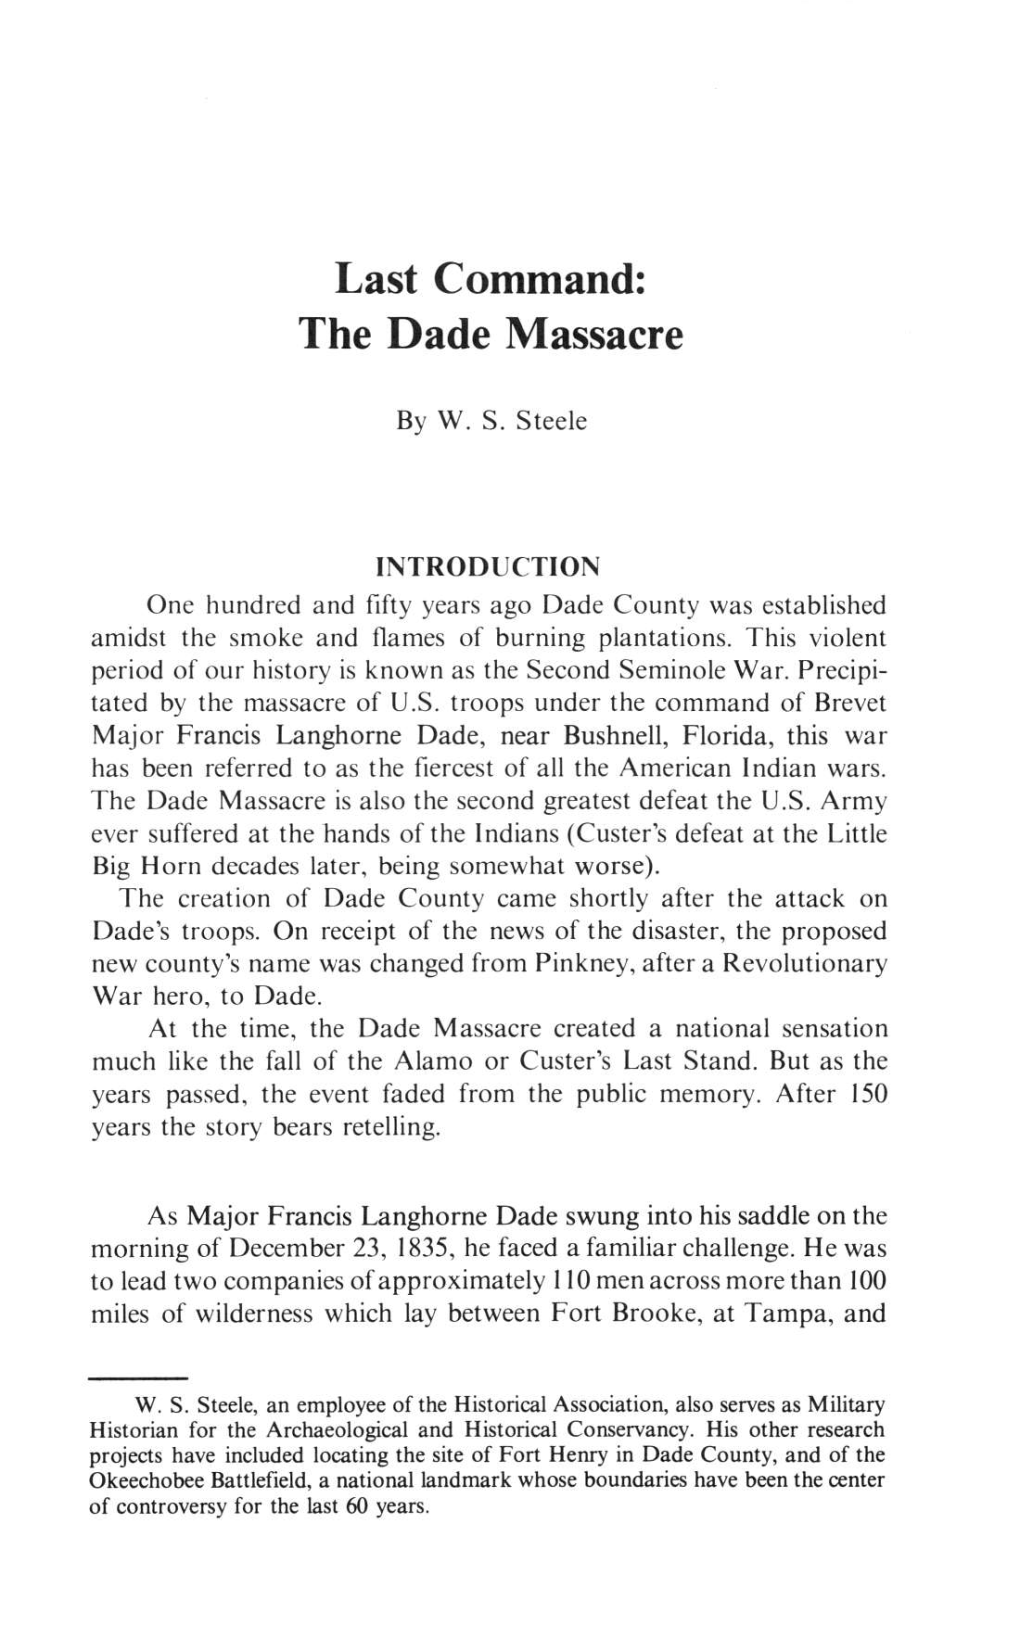 Last Command: the Dade Massacre : Tequesta : Number